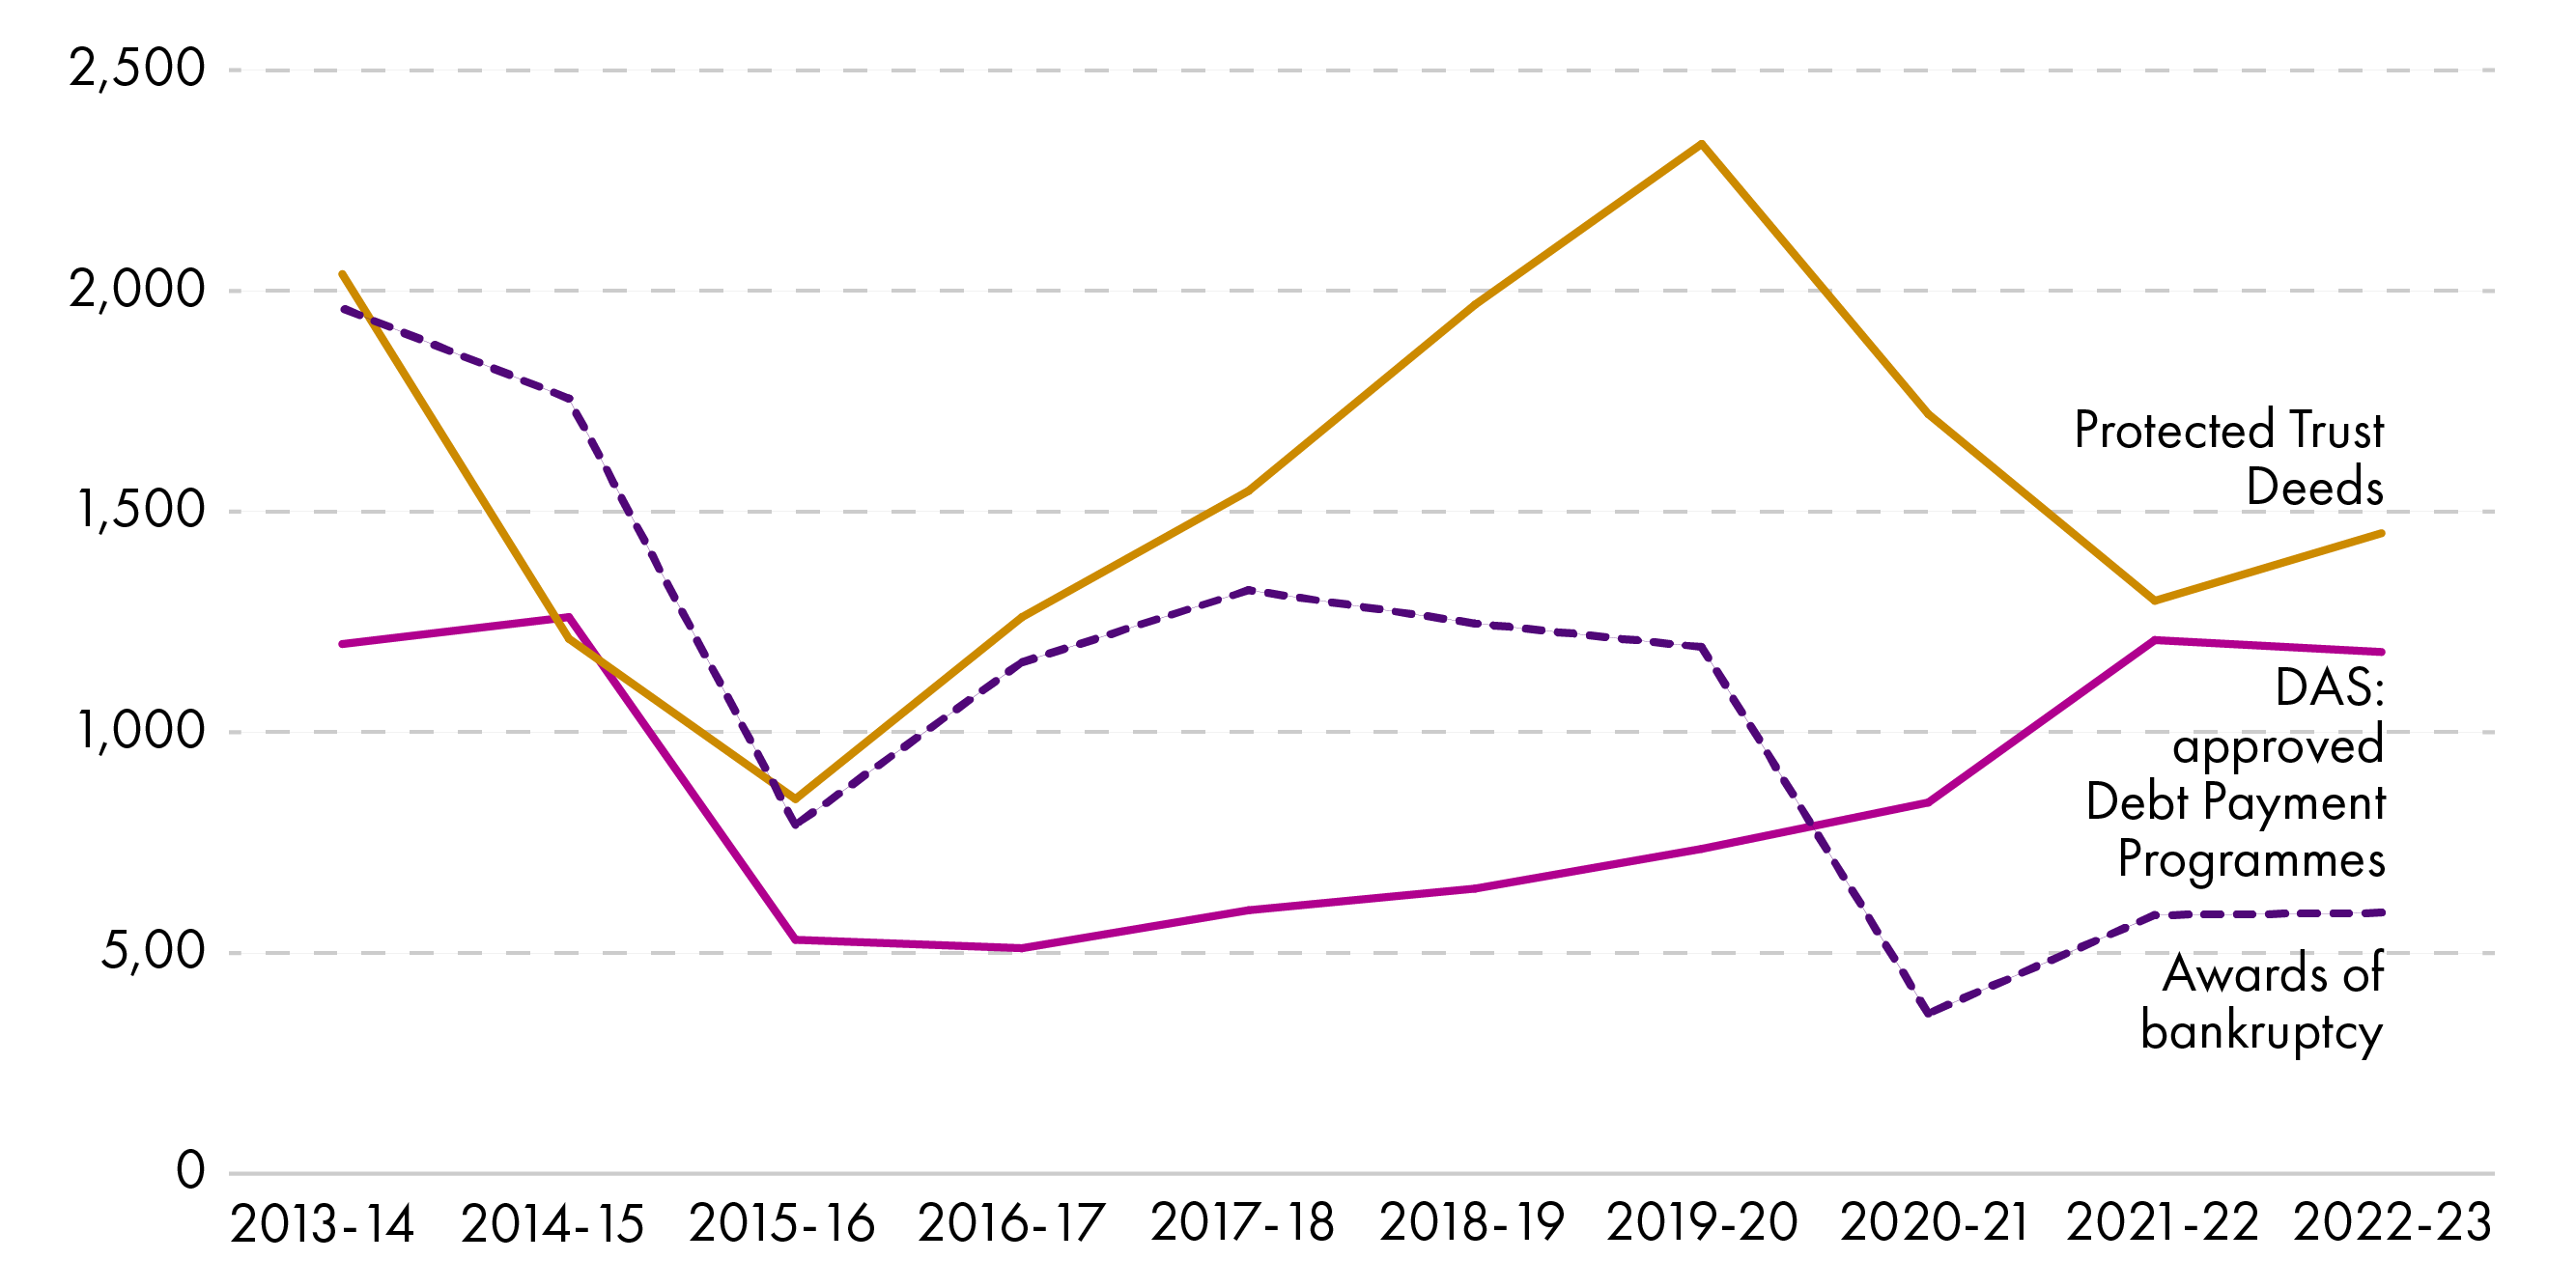 This graph looks at the use of statutory debt solutions between 2013/14 and 2022/23. The overall picture is mixed, with a gradual increase in the uptake of Debt Payment Programmes under the Debt Arrangement Scheme from 2016/17.